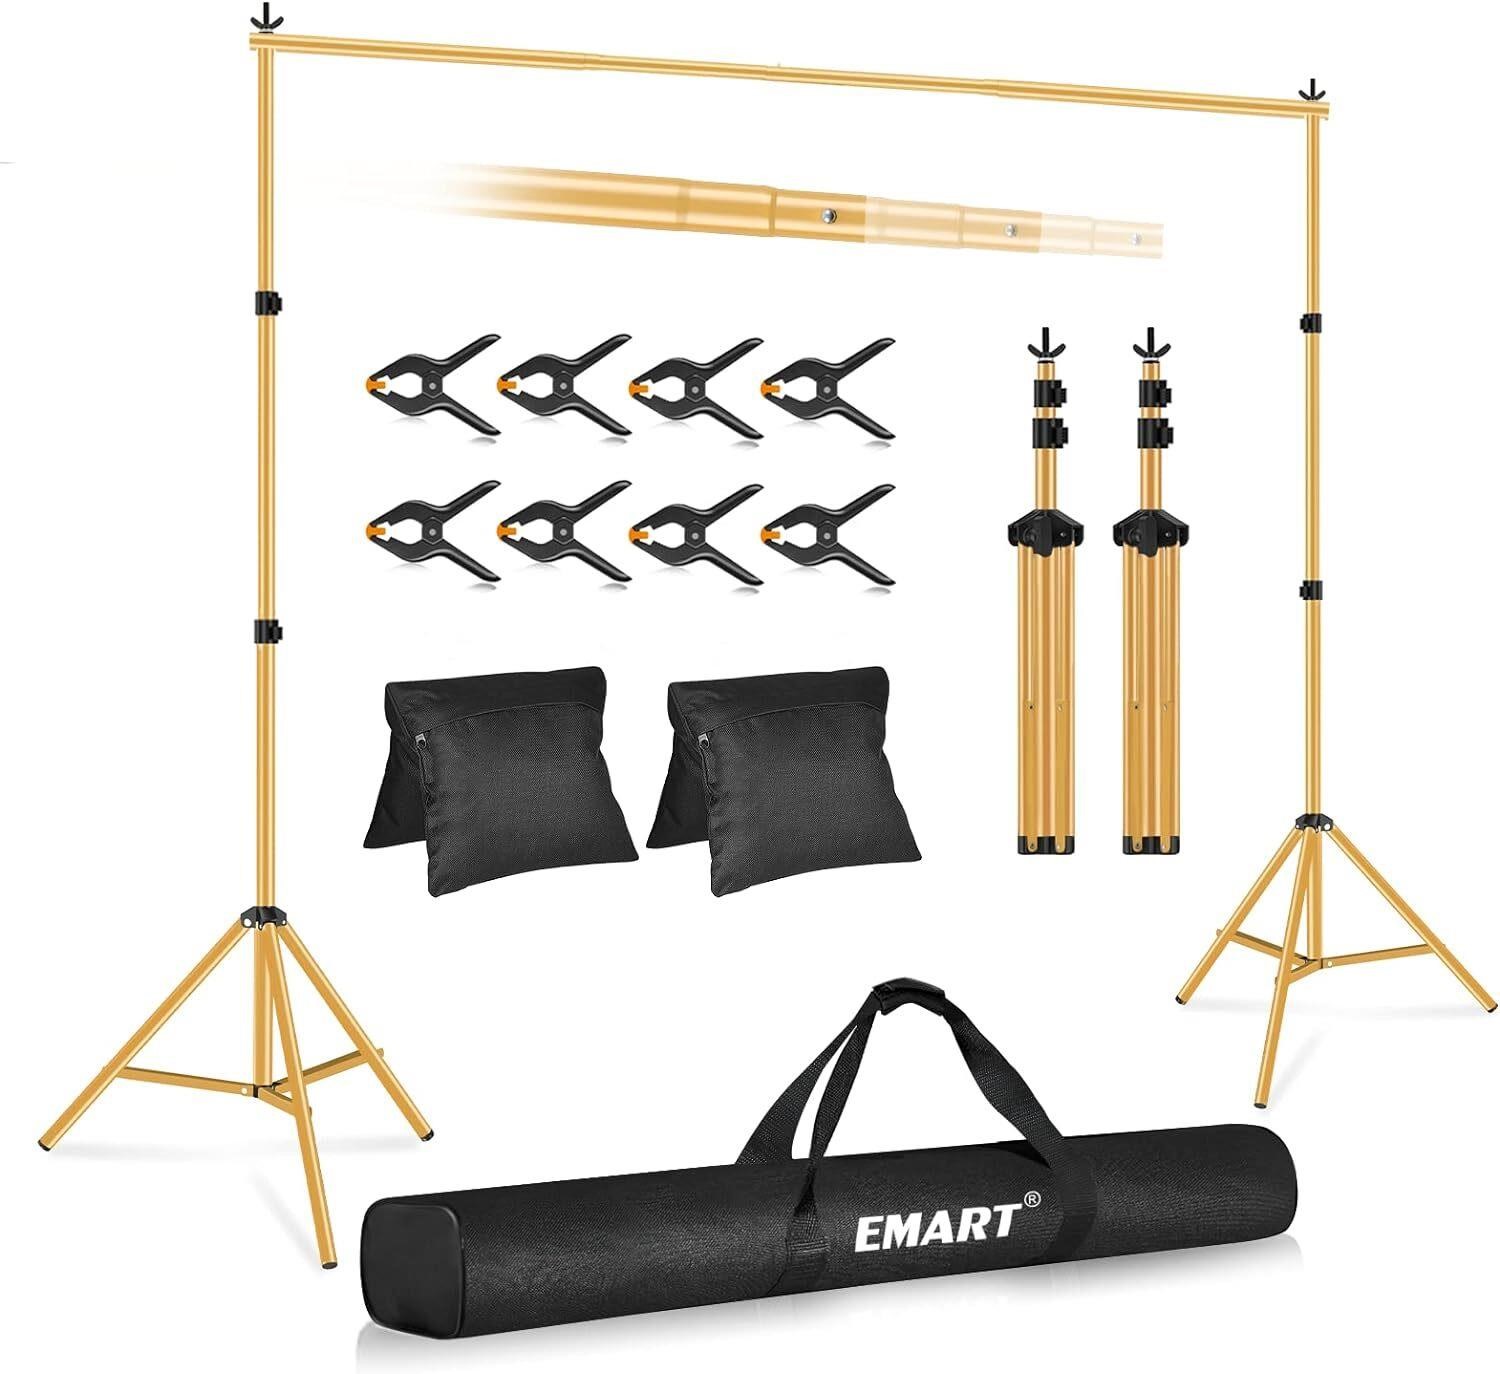 Emart Gold Backdrop Stand - 10x7Ft for Photos